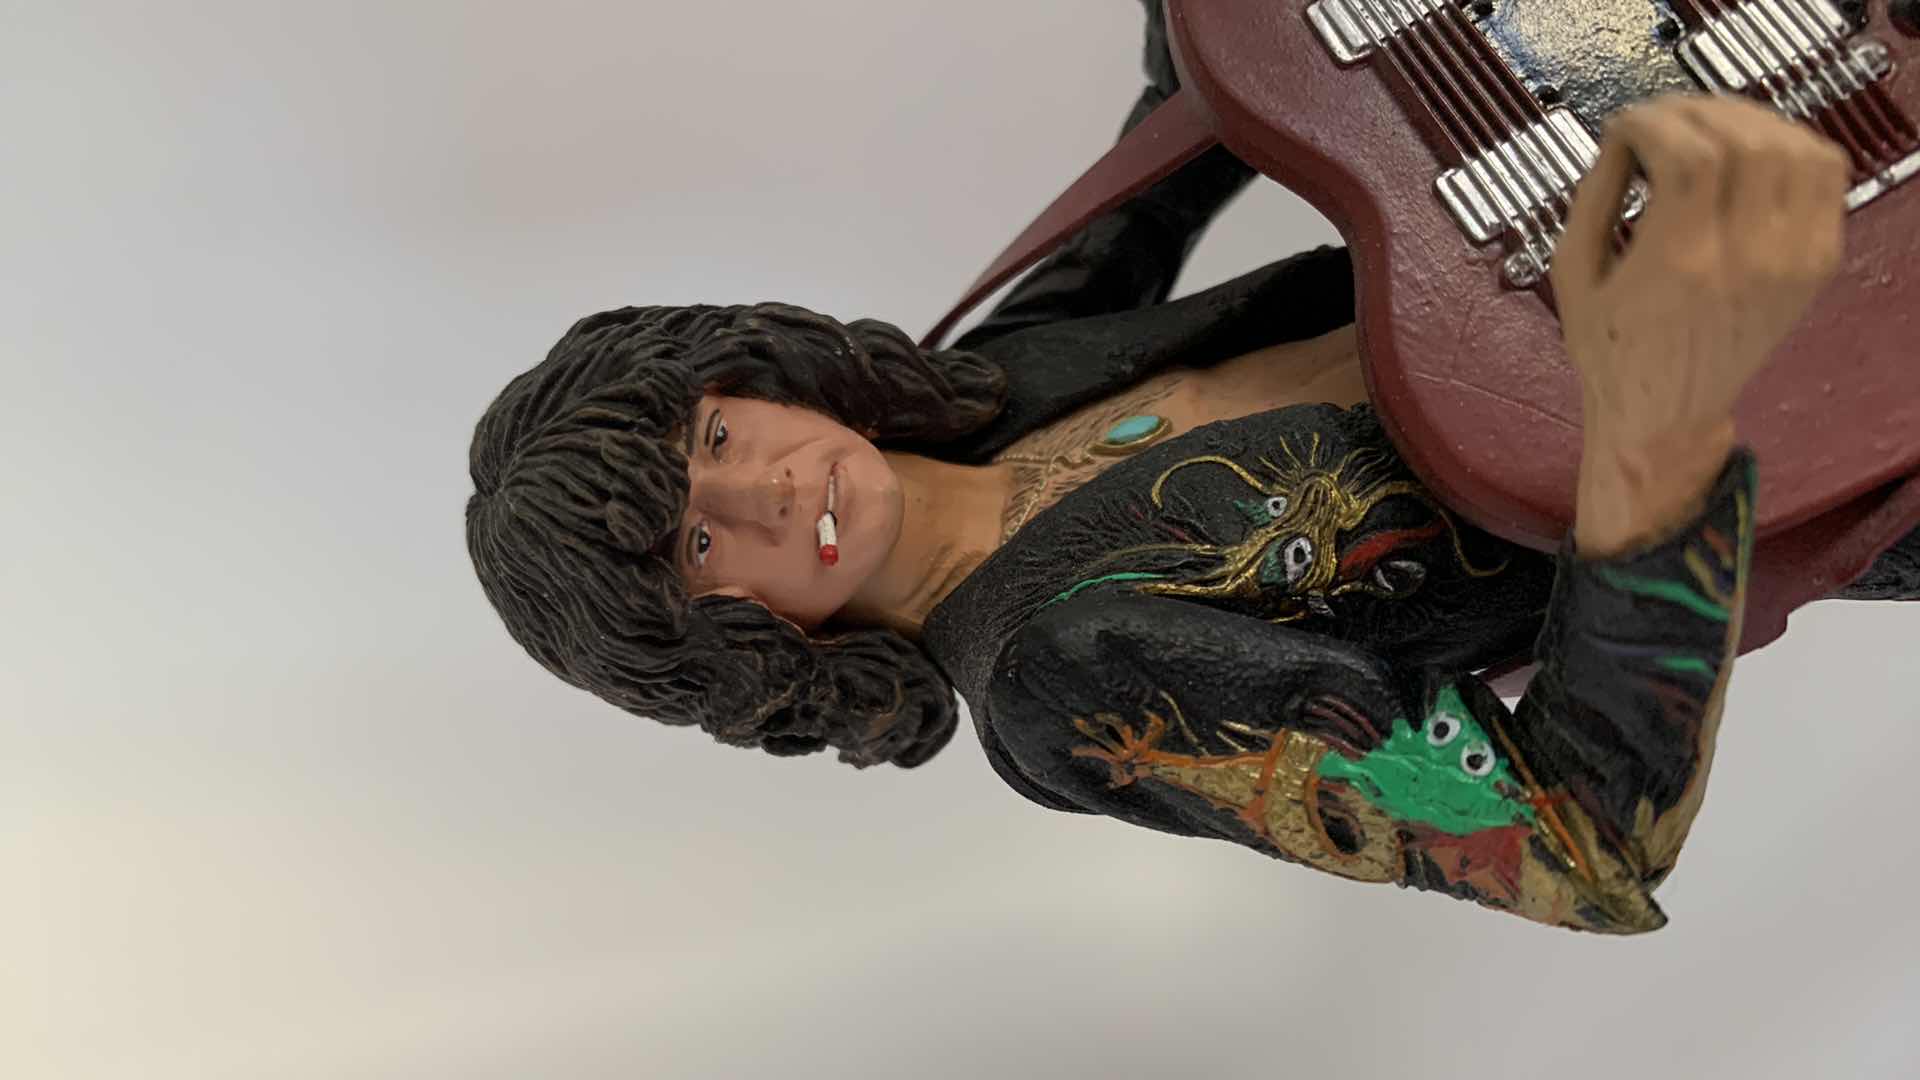 Photo 6 of 2006 NECA TOYS JIMMY PAGE ACTION FIGURE.